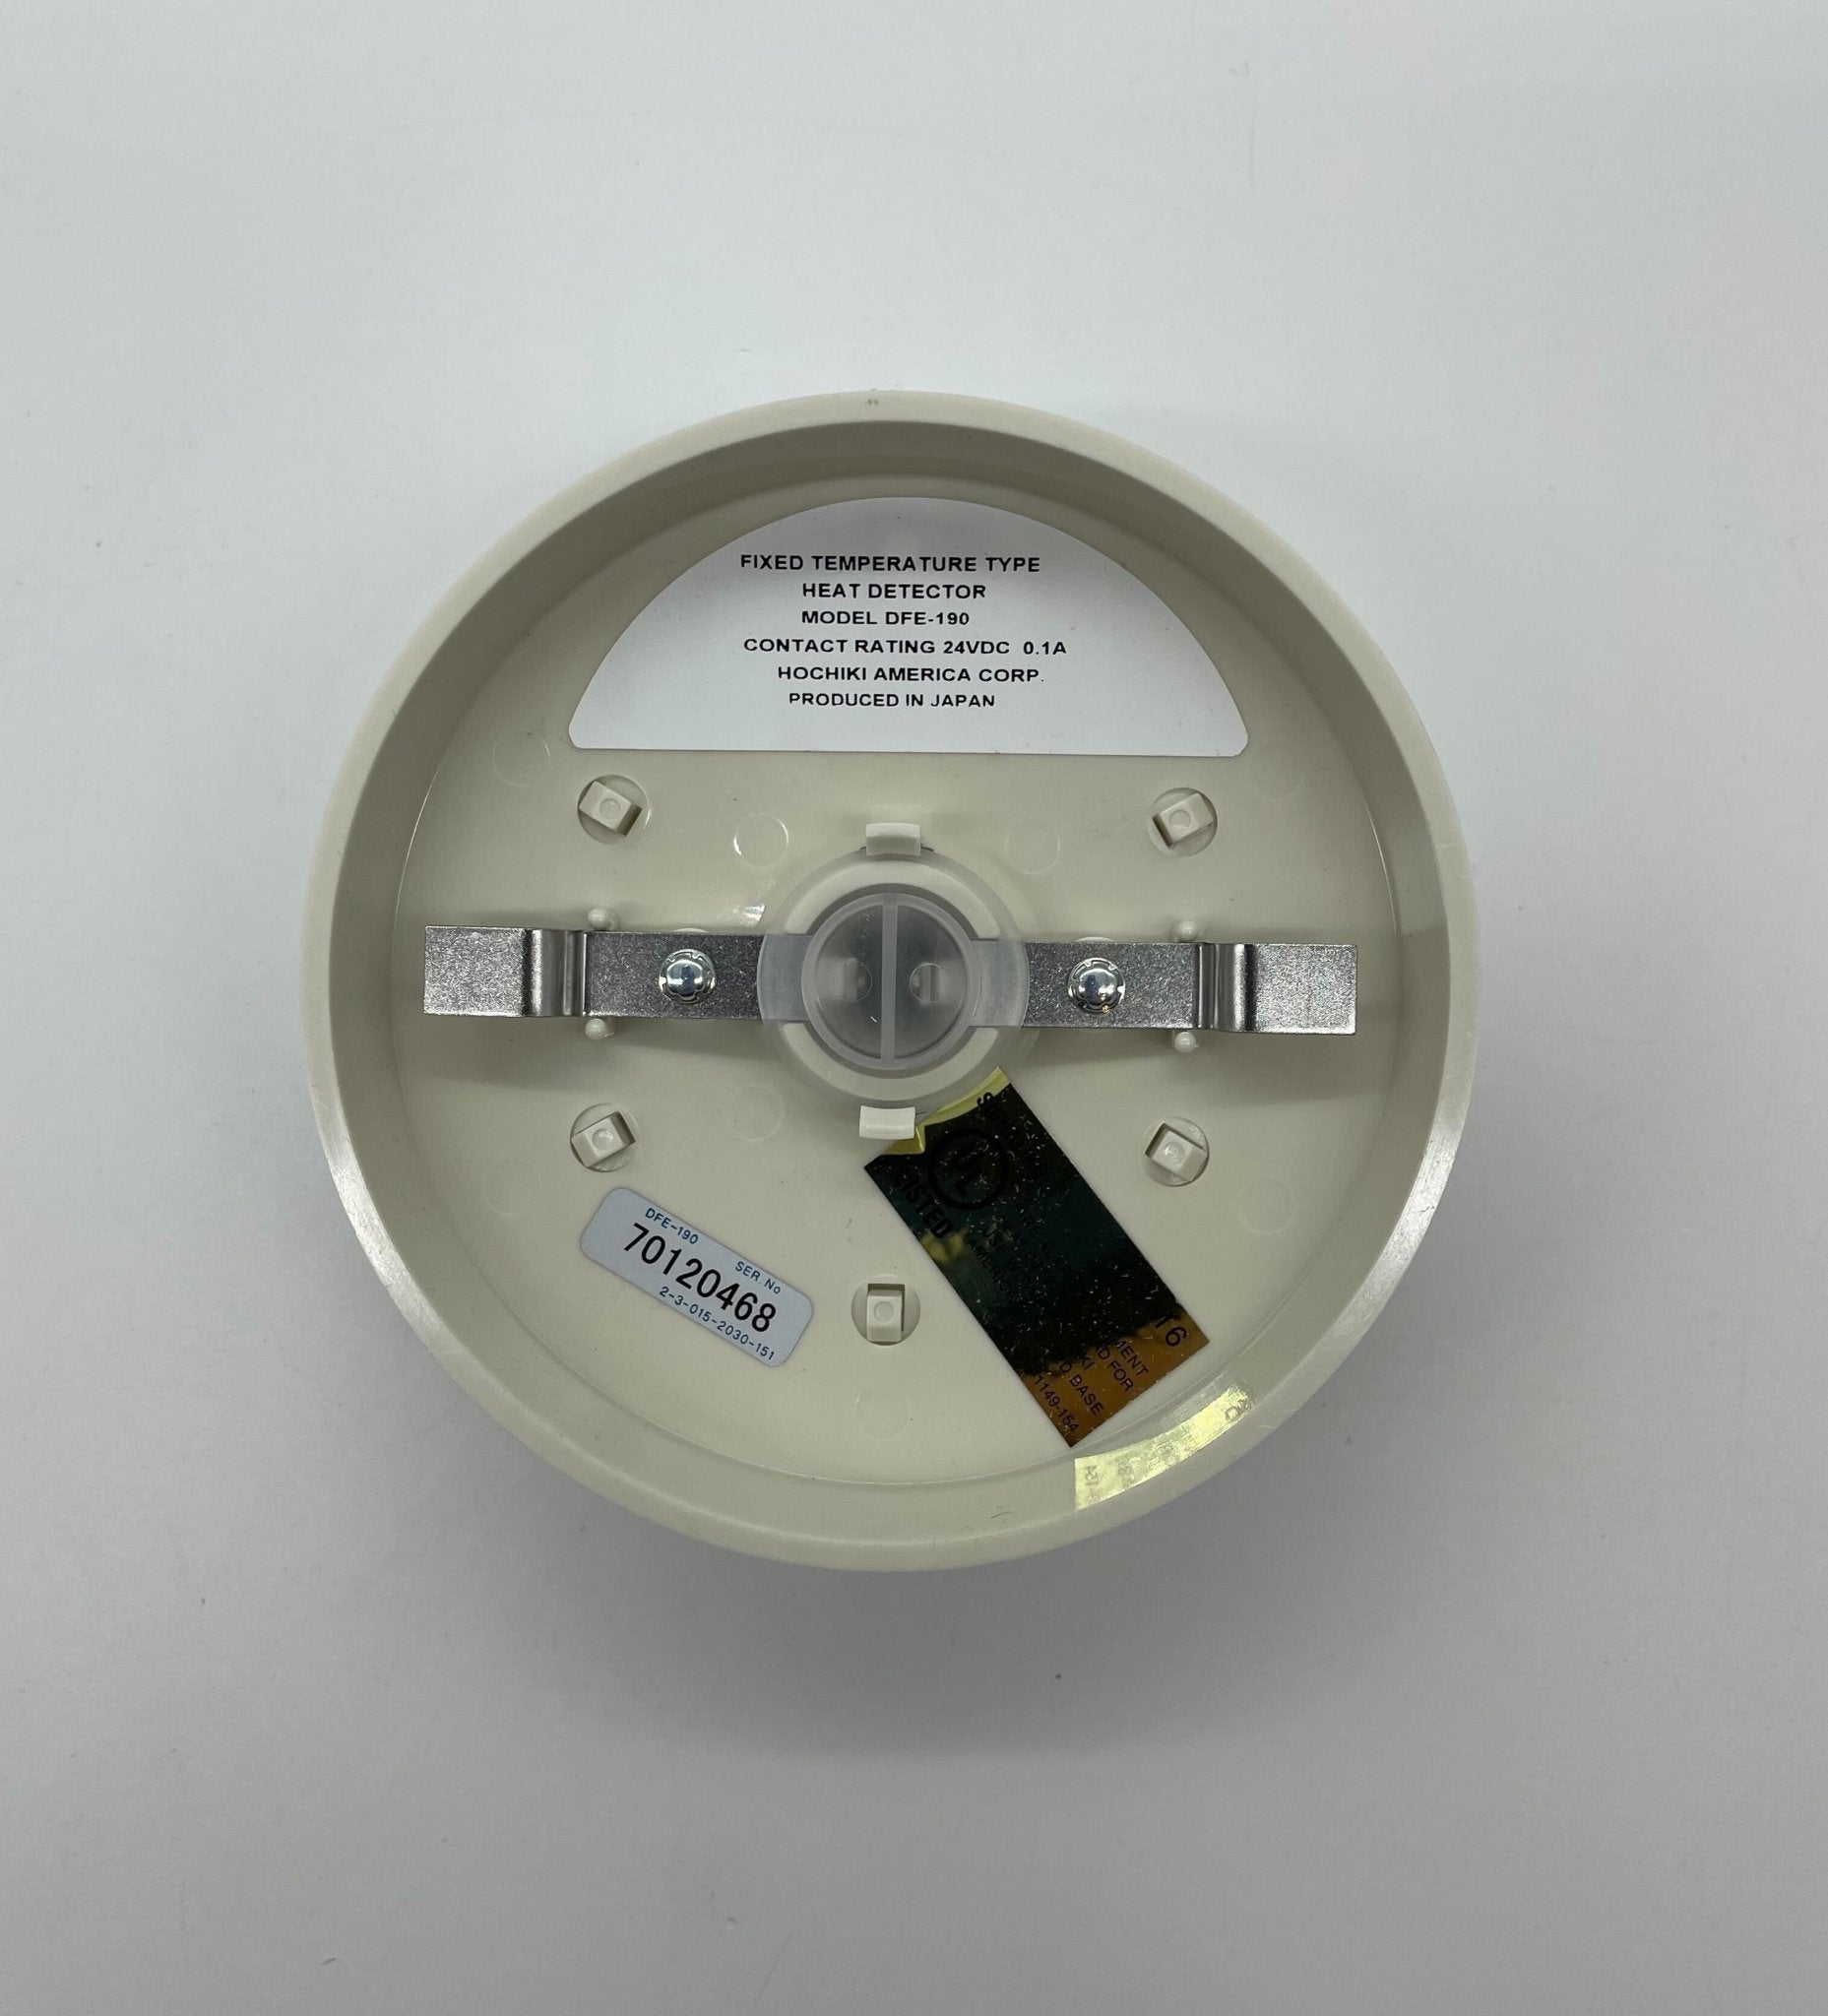 Potter DFE-190 - The Fire Alarm Supplier